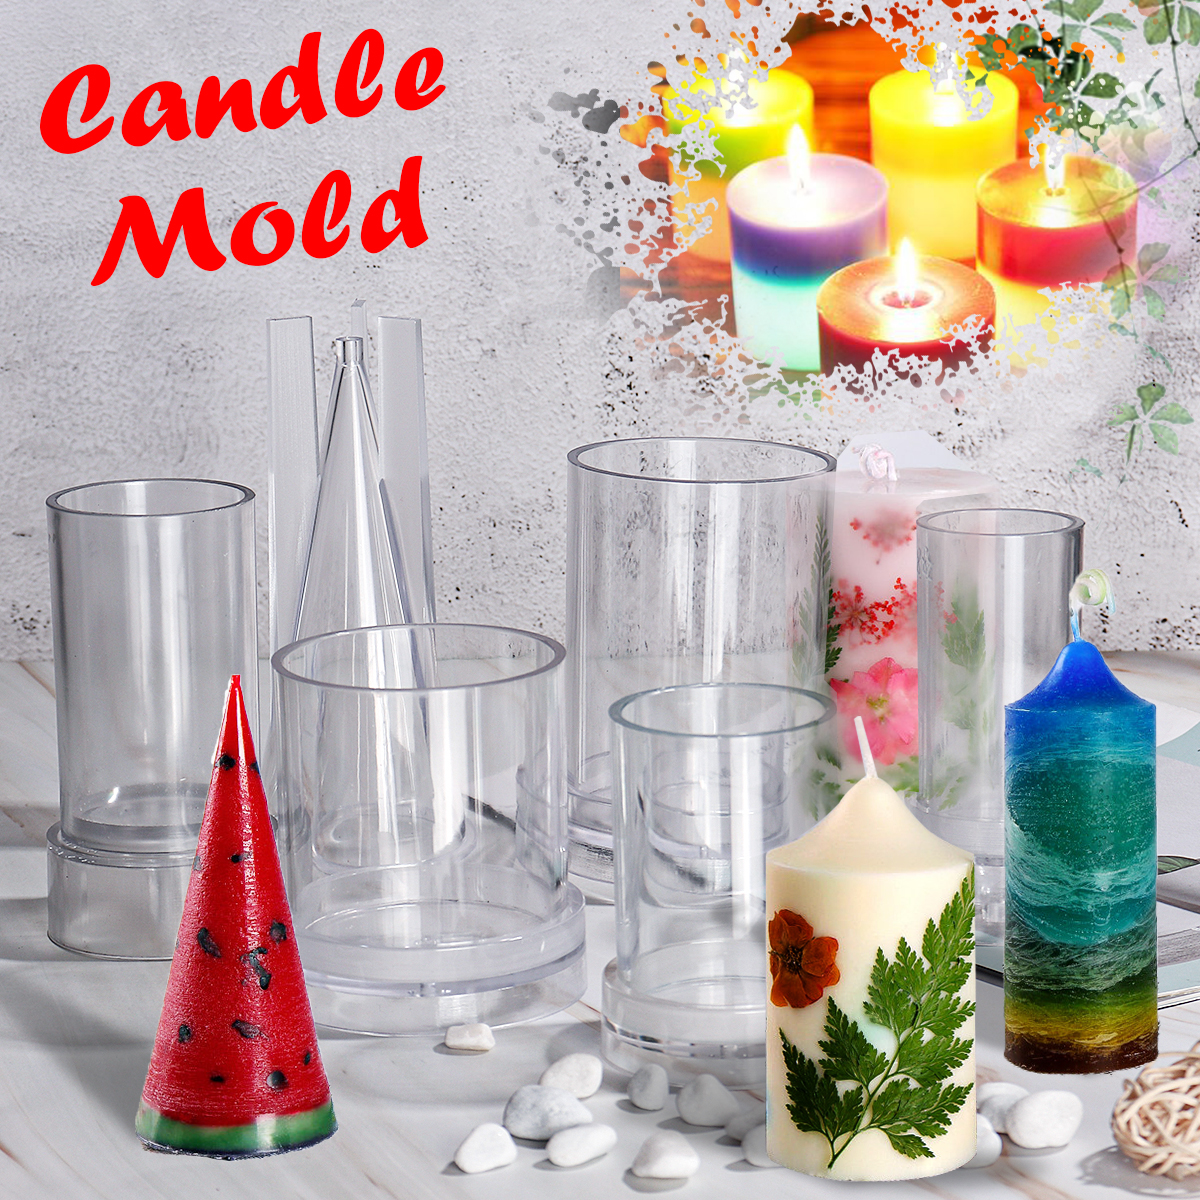 DIY-Candle-Mold-Candle-Making-Mould-Handmade-Soap-Molds-Clay-Craft-Tools-1647398-1